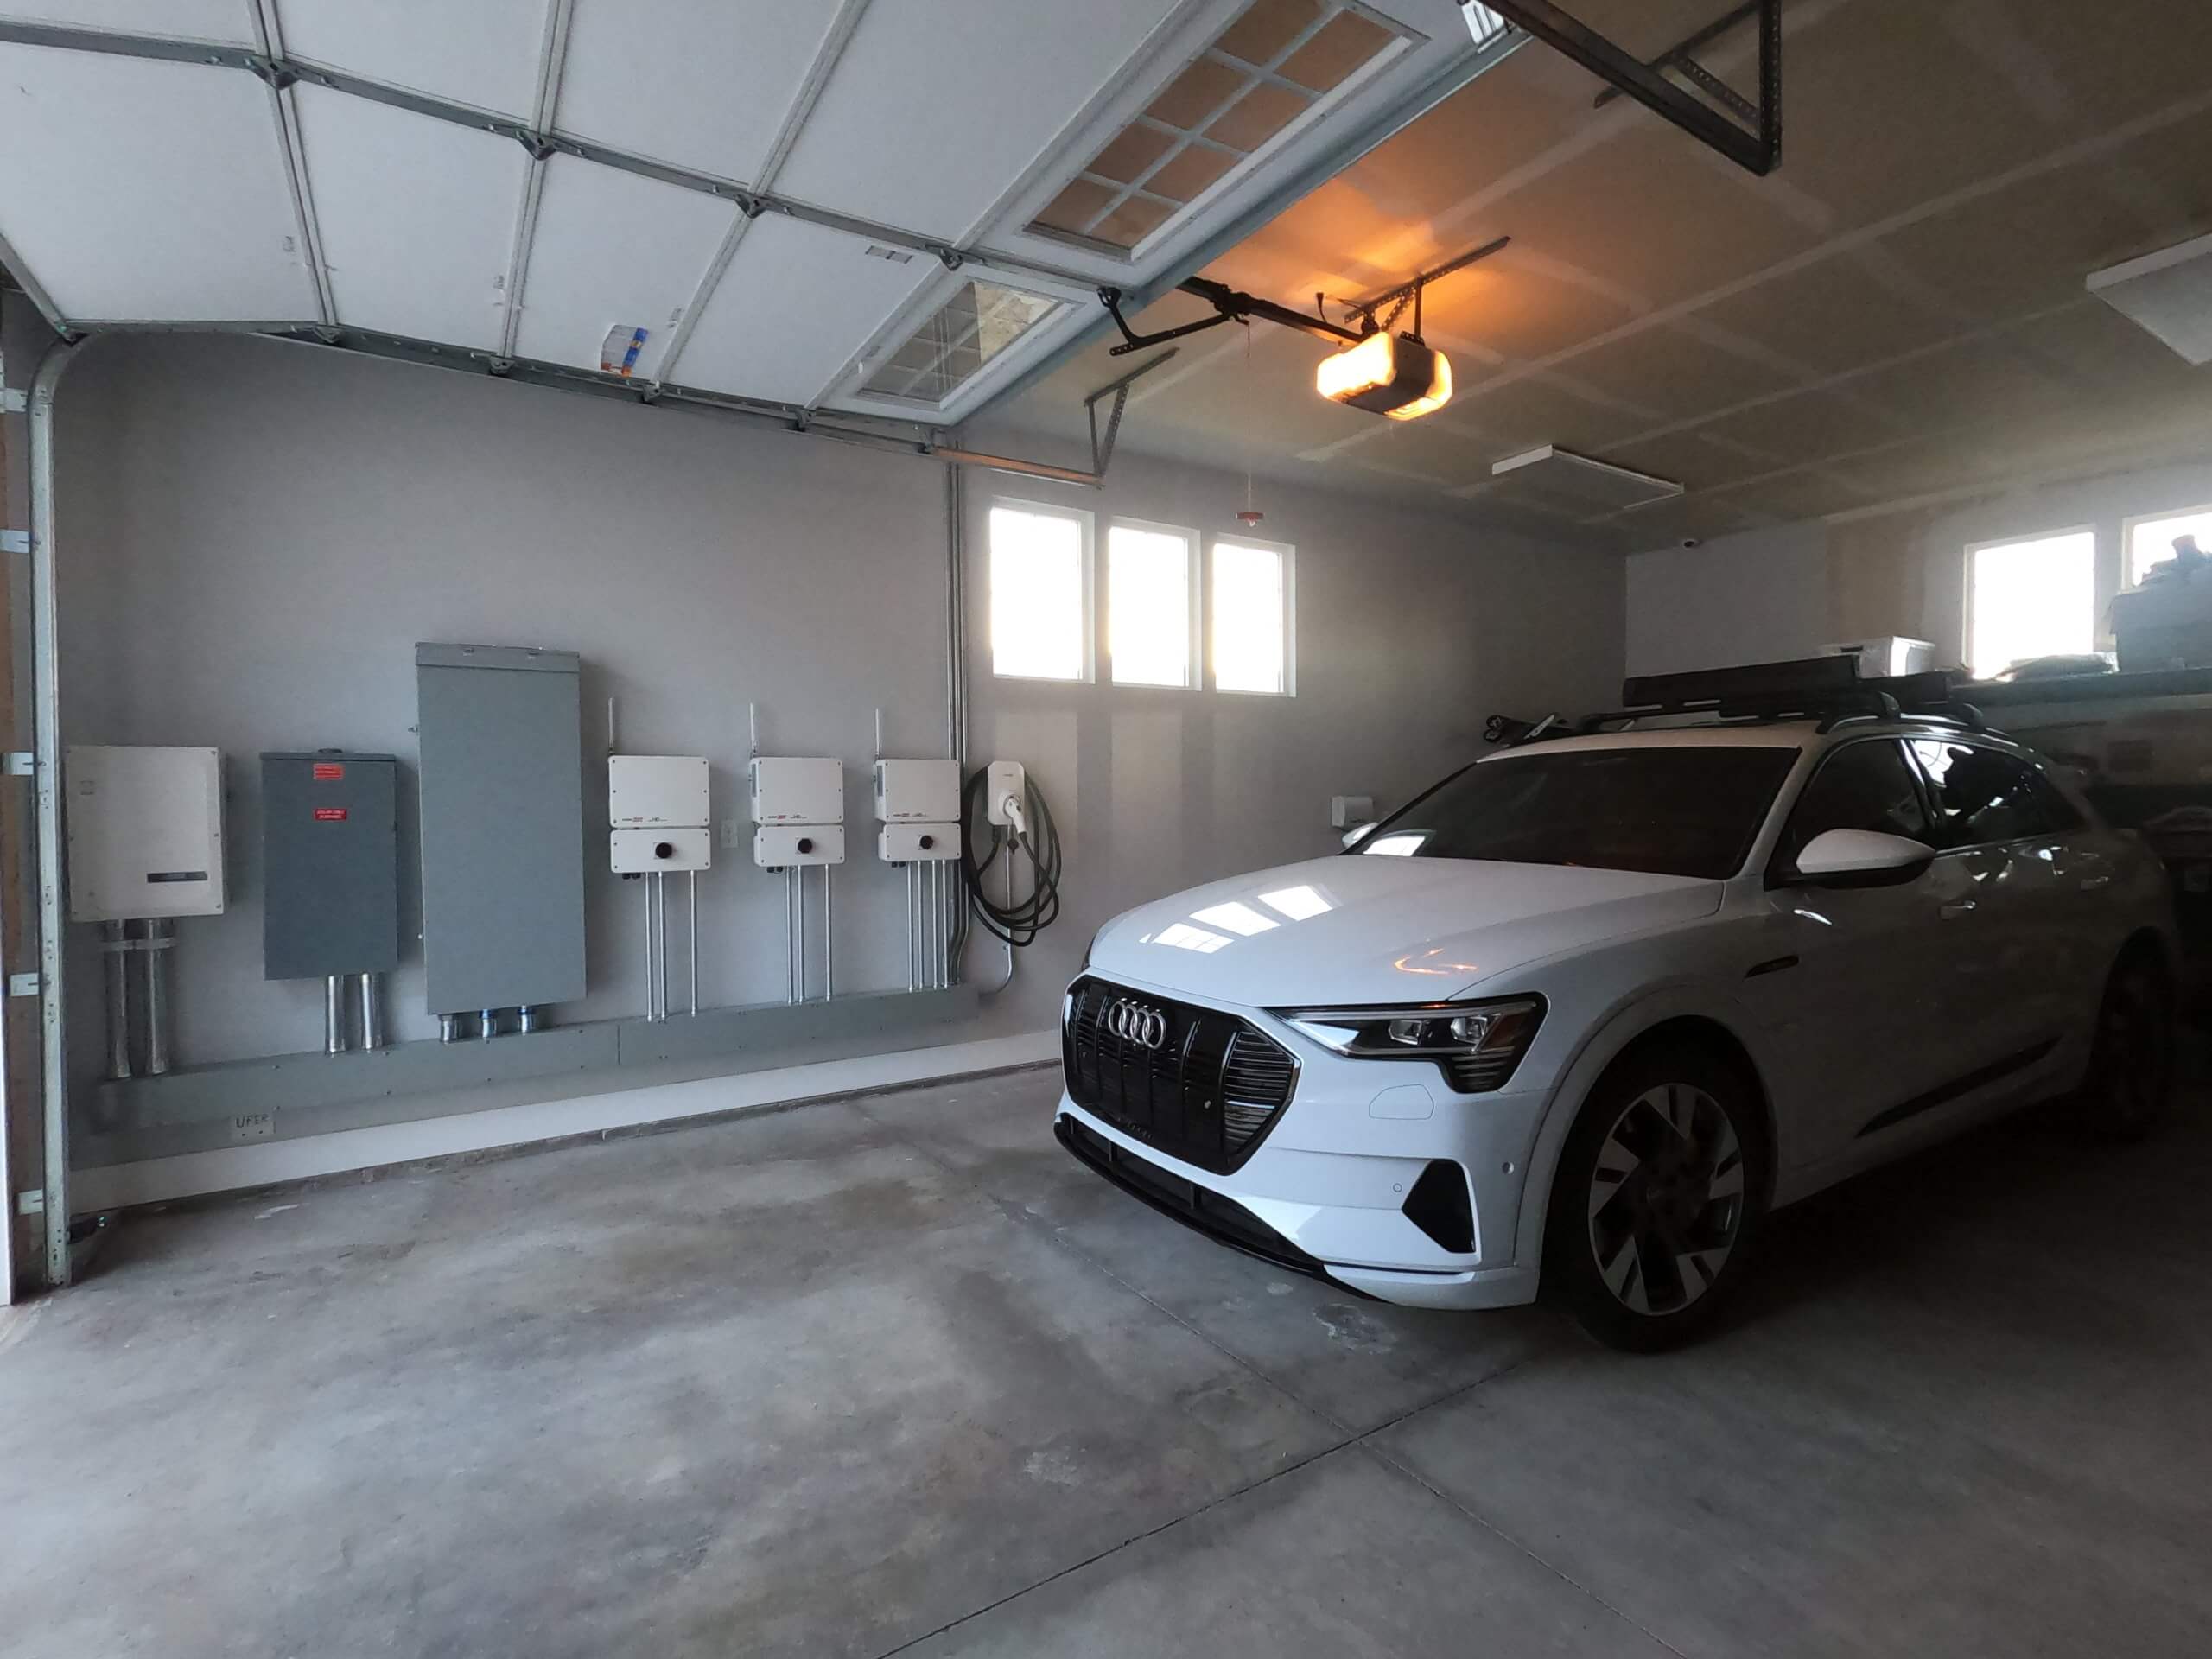 Audi Etron being Charged with SolarEdge Energy Hub Inverters and Electric Car Charger